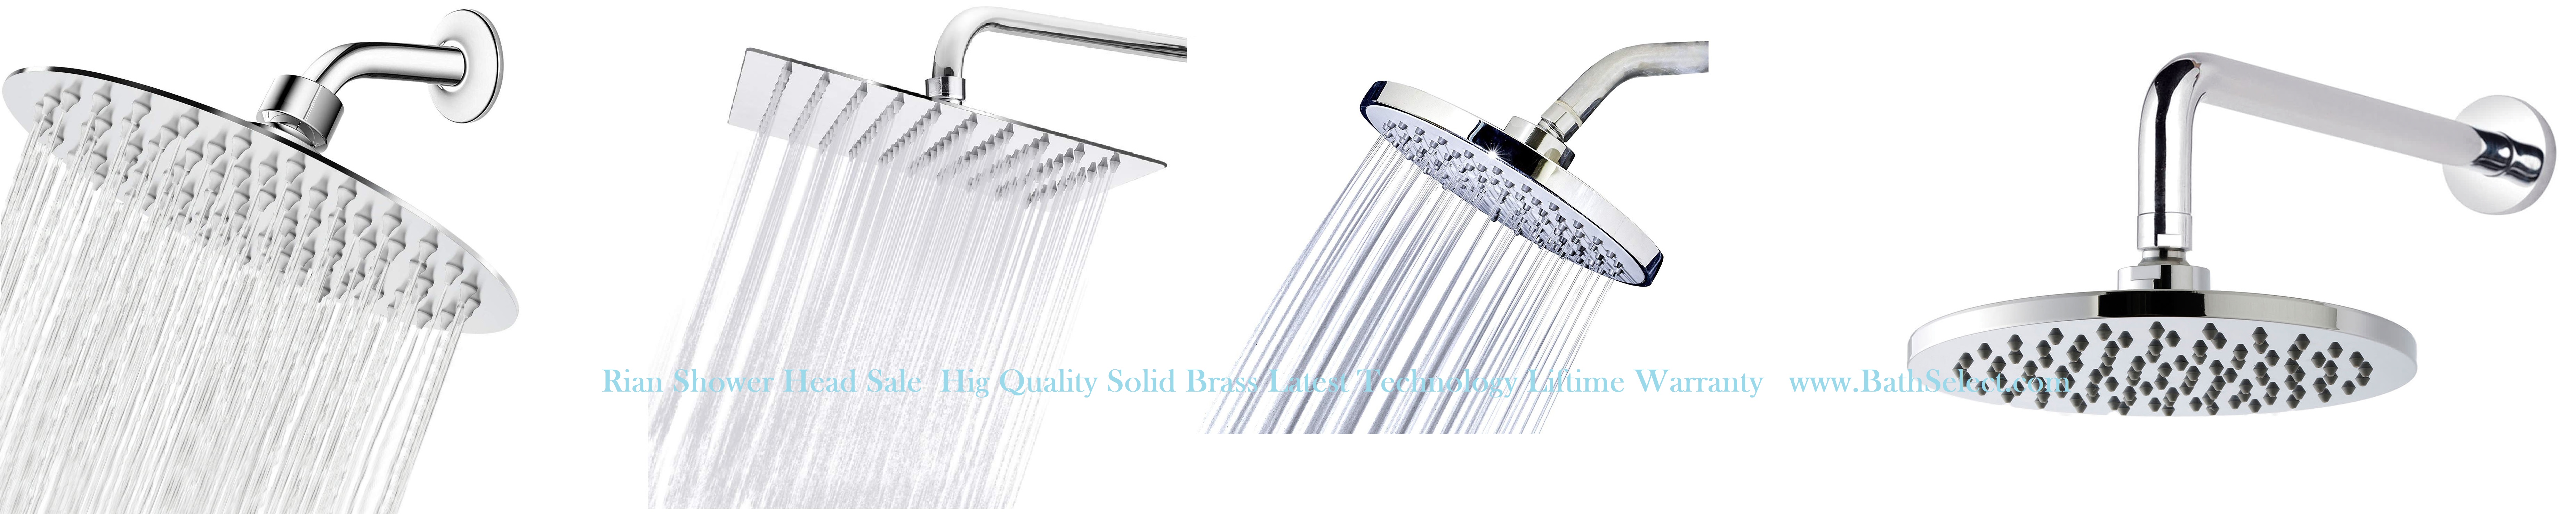 What Are Best Rain Shower Head Reviews